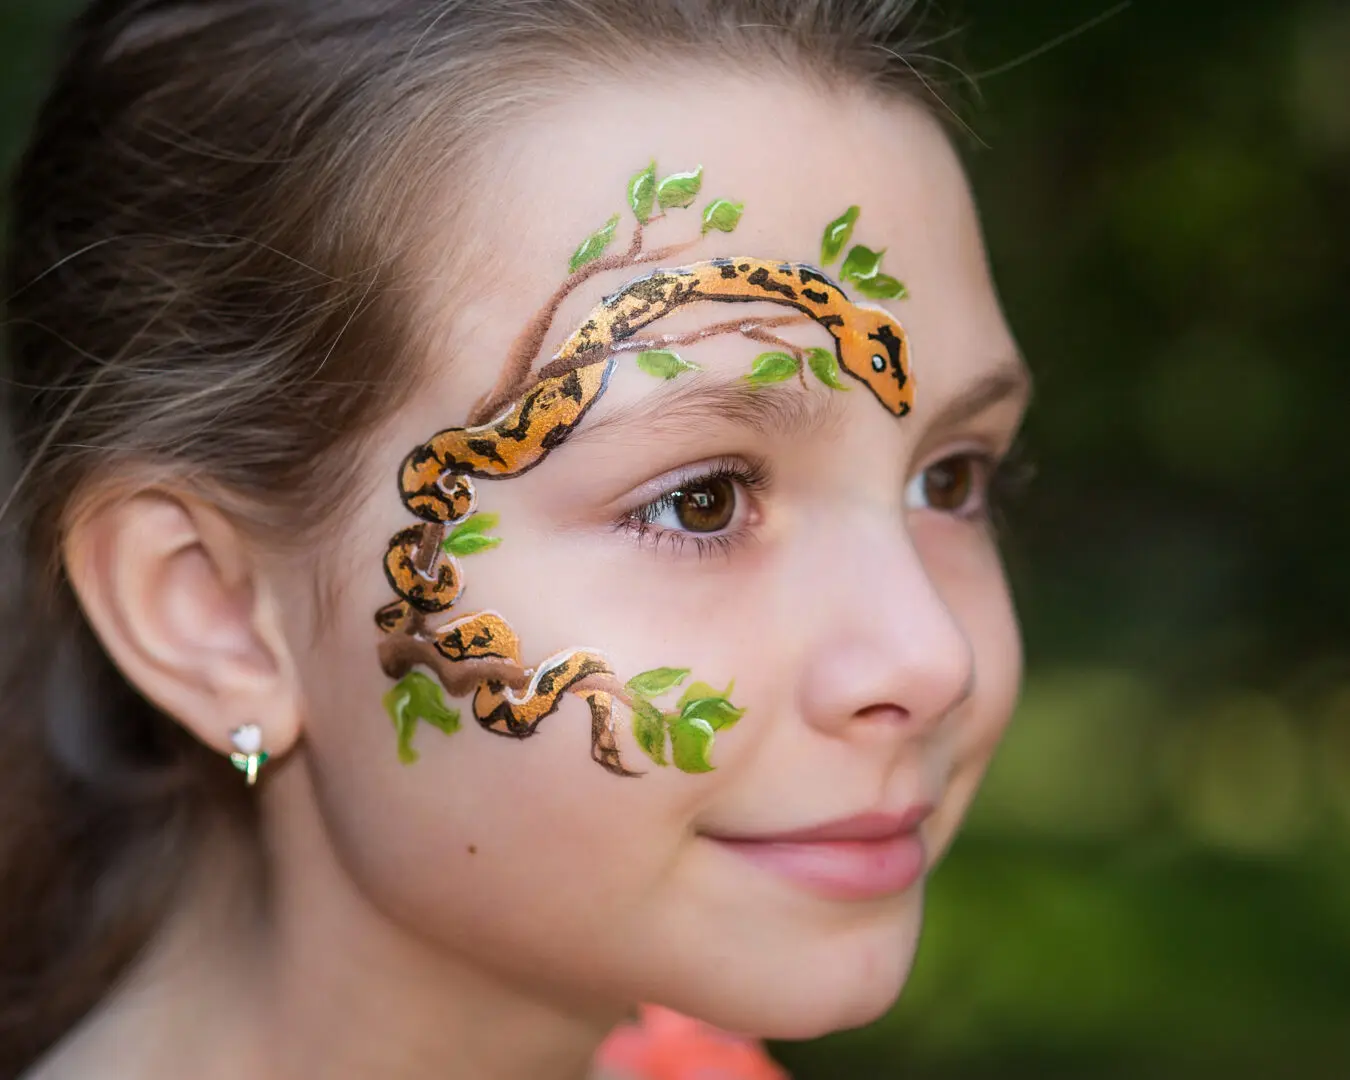 A girl with a snake painted on her face.